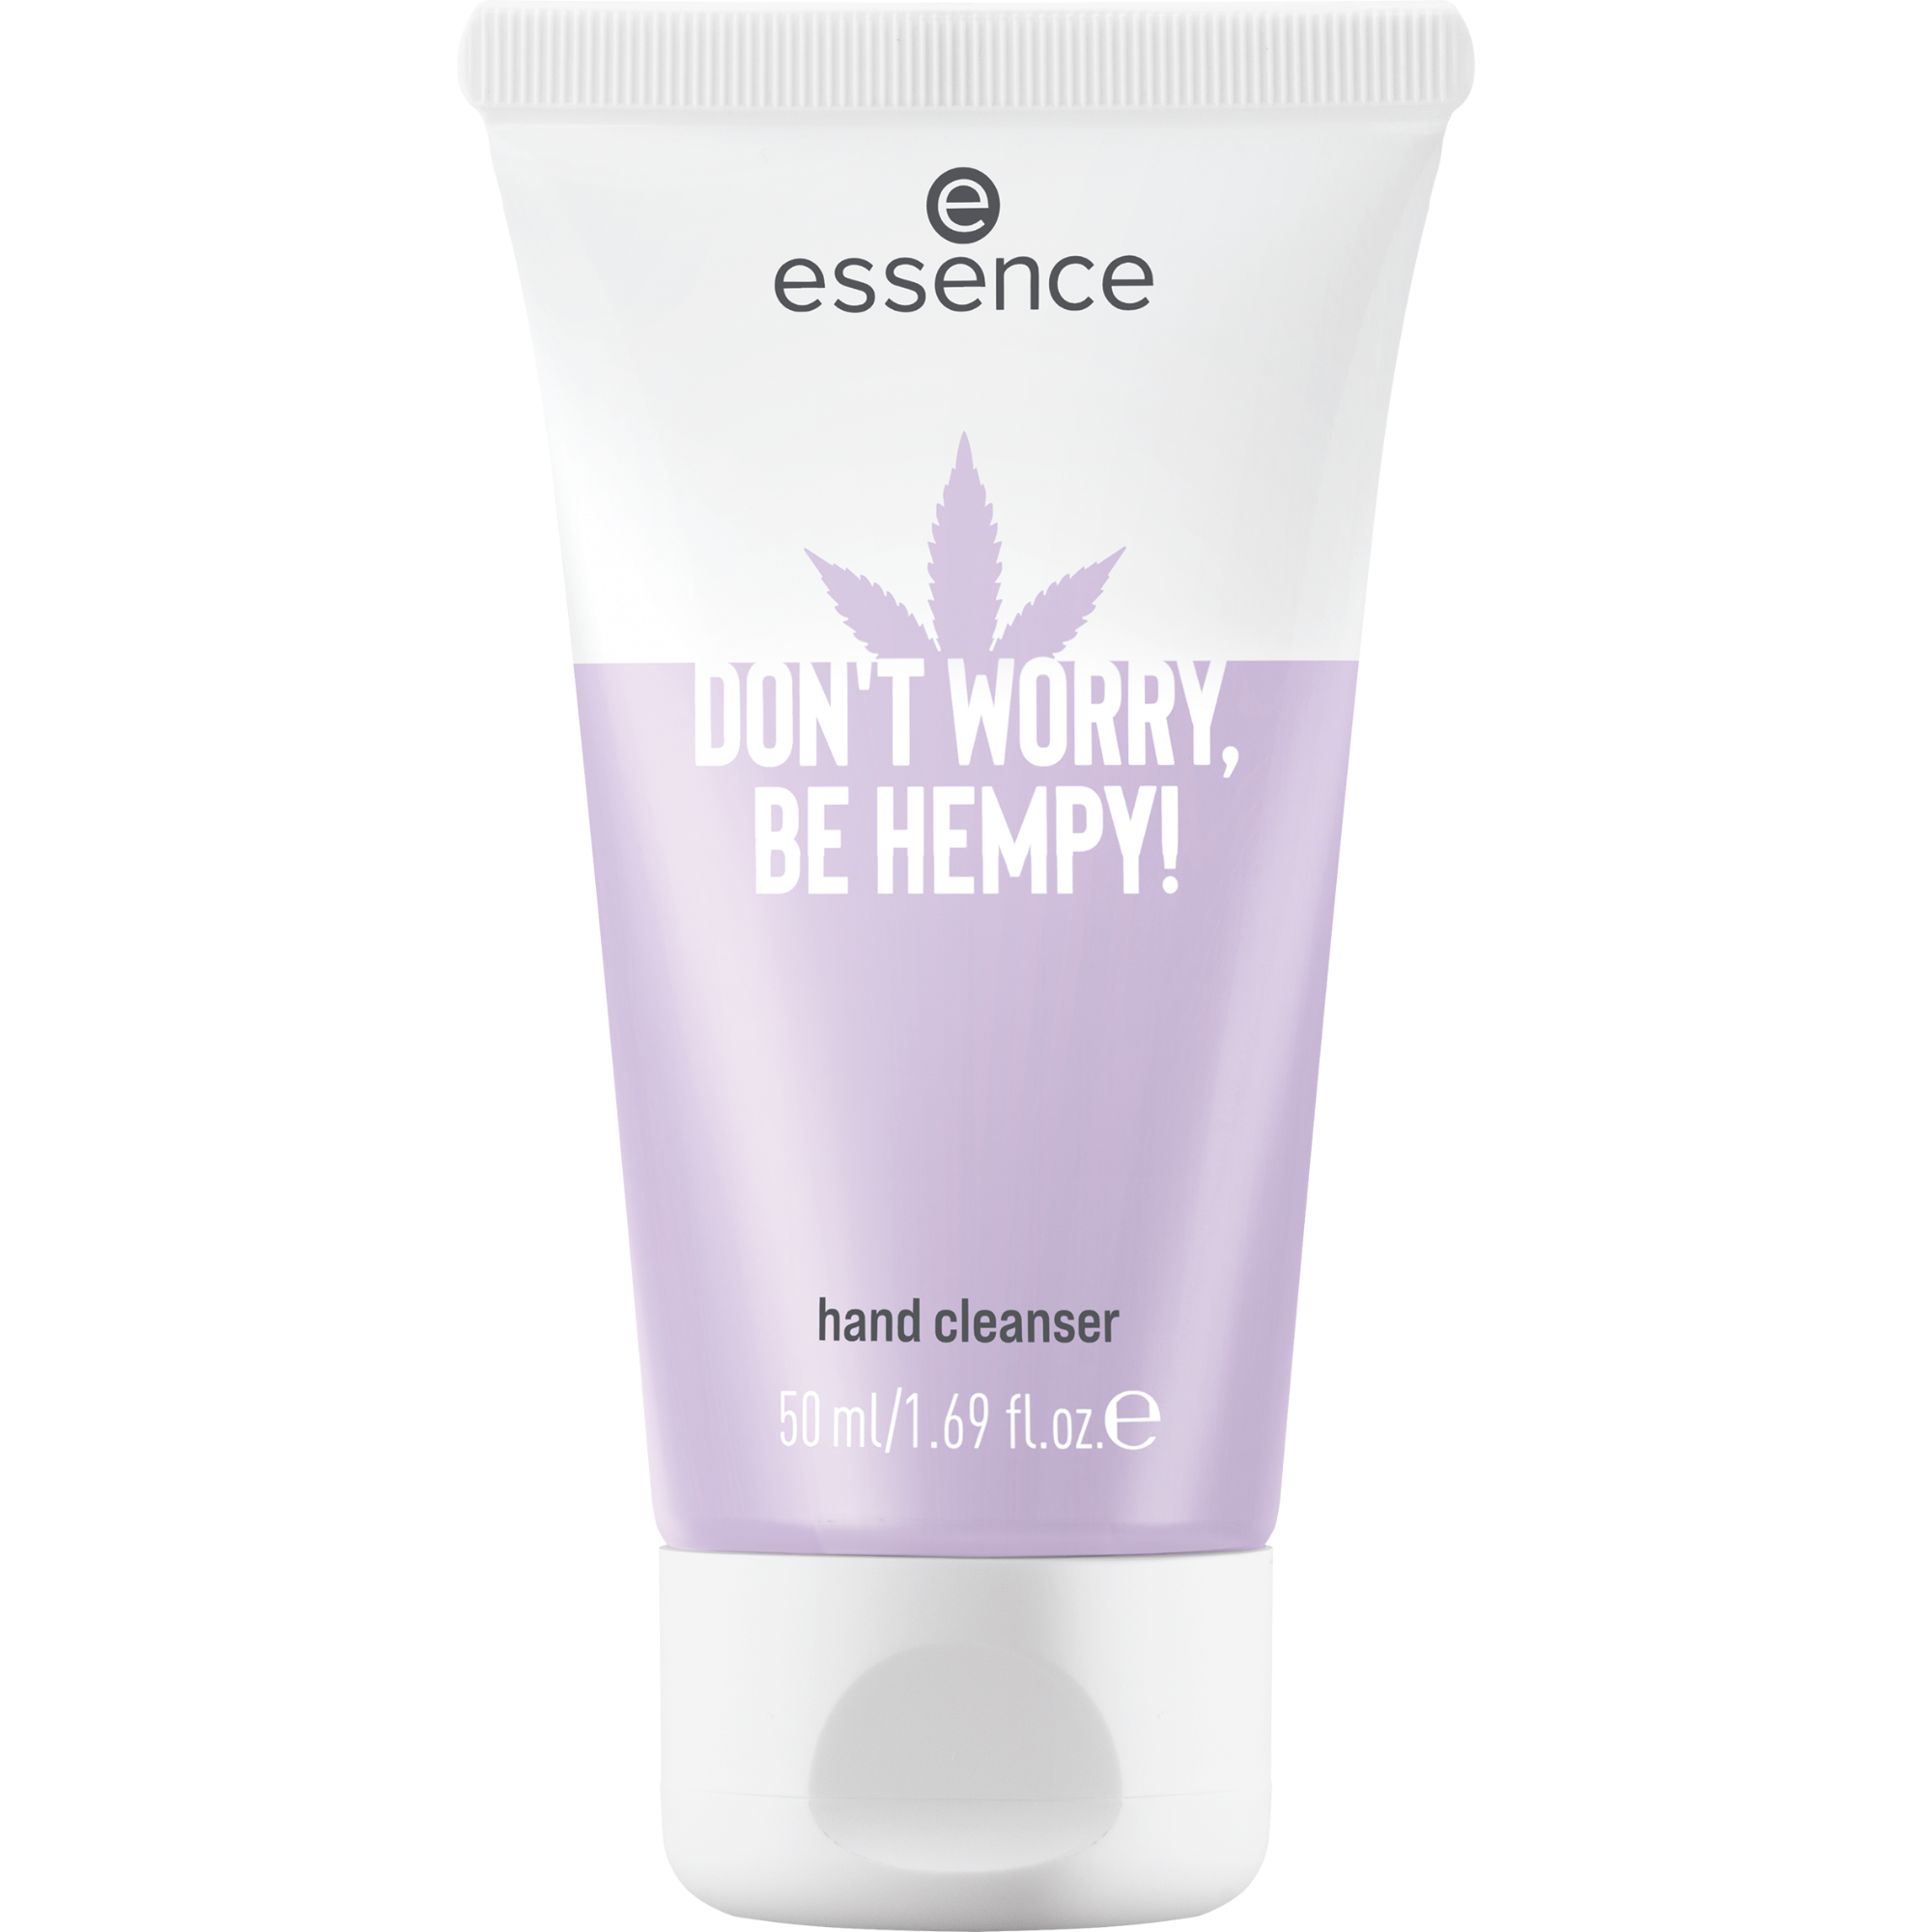 DON'T WORRY. BE HEMPY! clean & care hand treatment